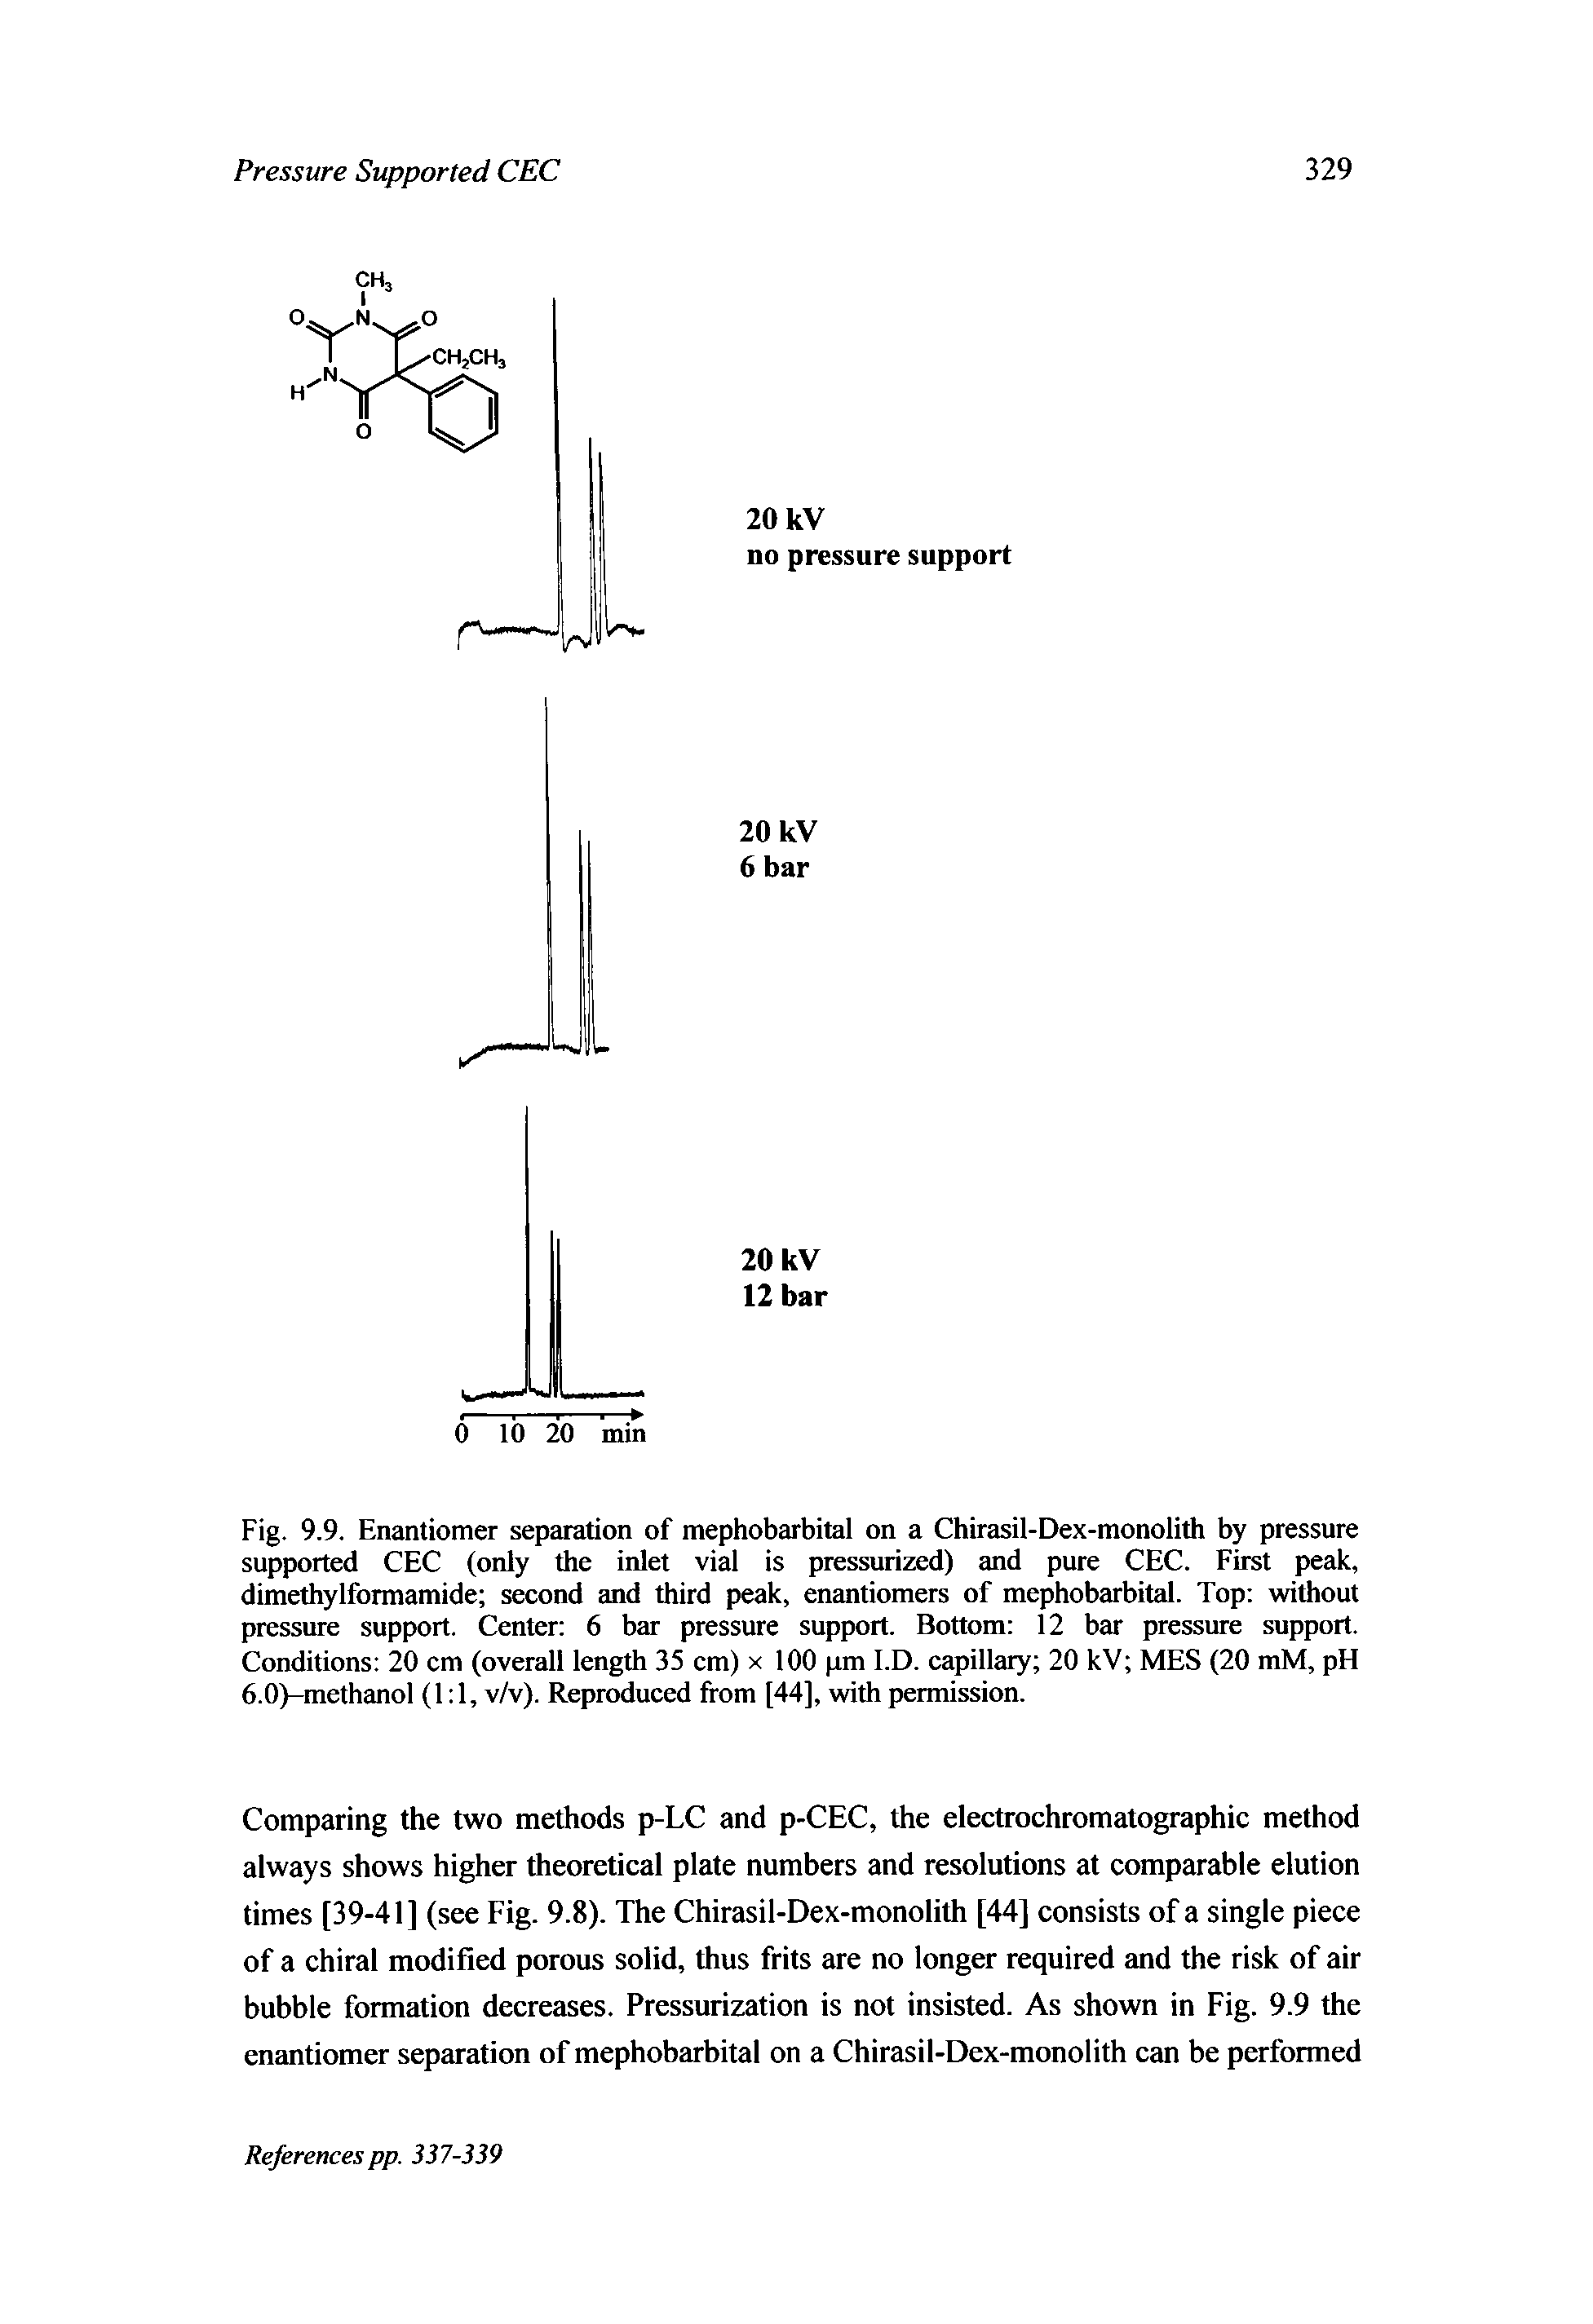 Fig. 9.9. Enantiomer separation of mephobarbital on a Chirasil-Dex-monolith by pressure supported CEC (only the inlet vial is pressurized) and pure CEC. First peak, dimethylformamide second and third peak, enantiomers of mephobarbital. Top without pressure support. Center 6 bar pressure support. Bottom 12 bar pressure support. Conditions 20 cm (overall length 35 cm) x 100 pm I.D. capillary 20 kV MES (20 mM, pH 6.0)-methanol (1 1, v/v). Reproduced from [44], with permission.